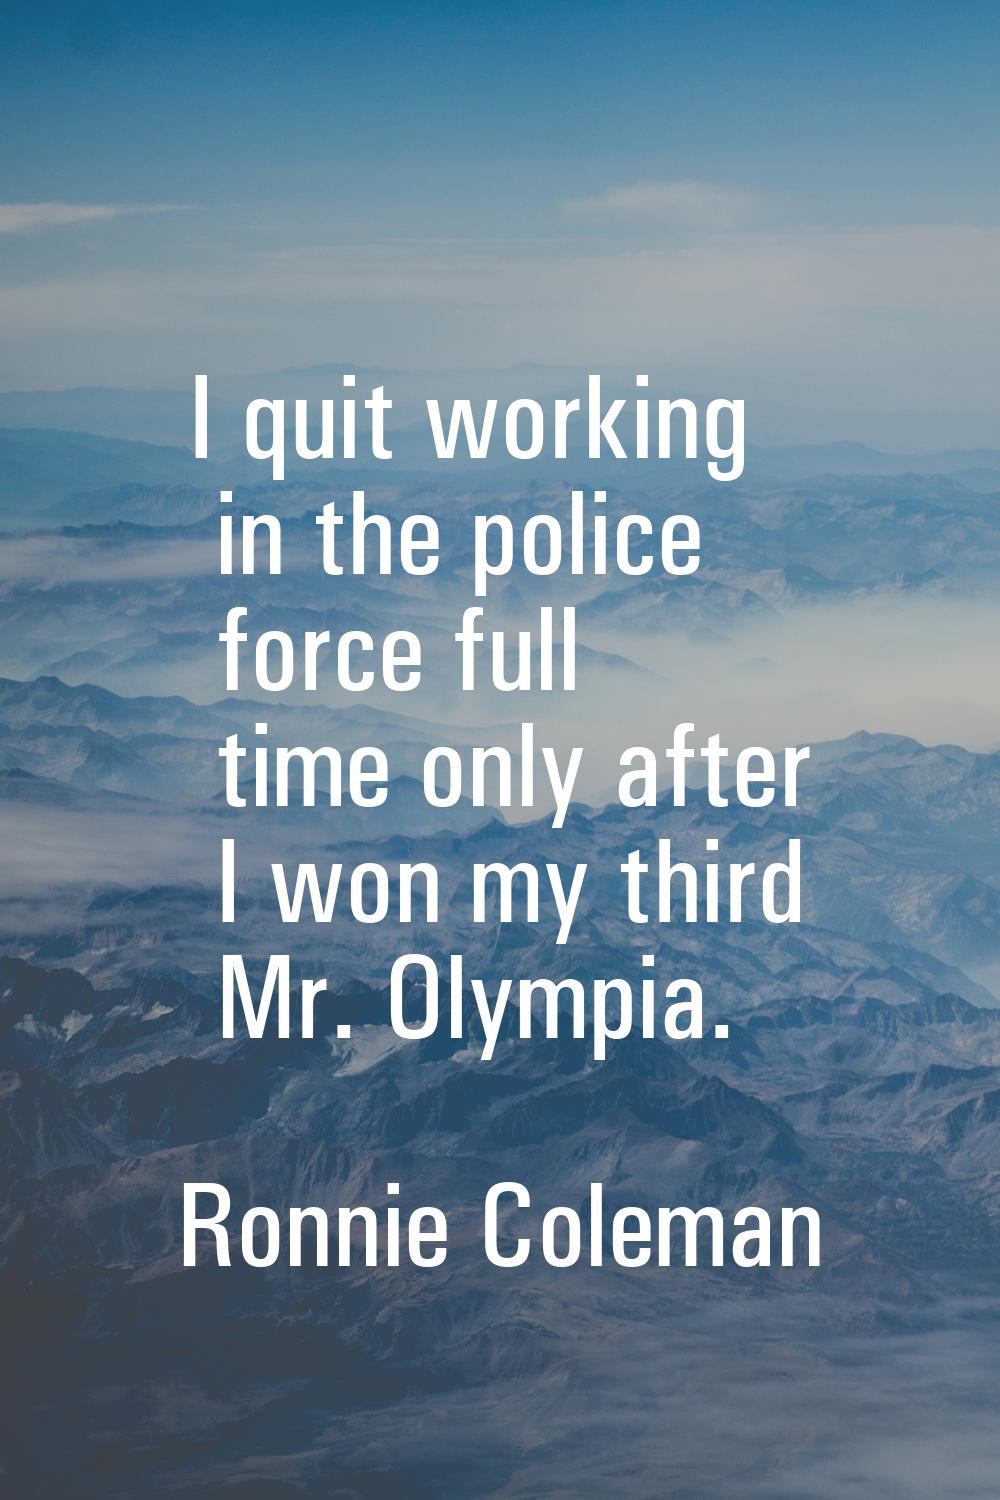 I quit working in the police force full time only after I won my third Mr. Olympia.